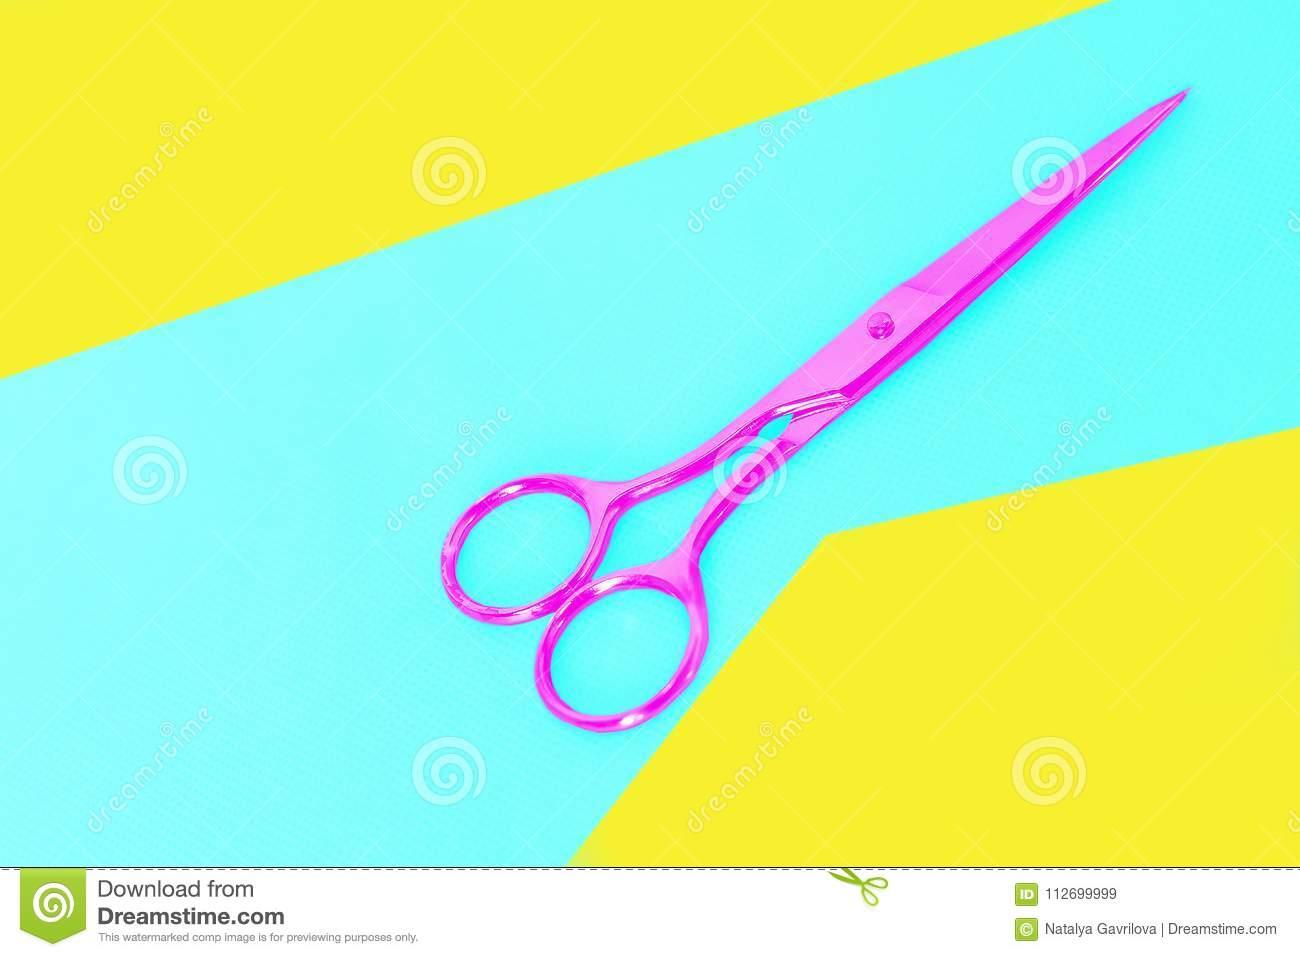 1300 x 957 · jpeg - Hairdressing Scissors On A Green Background Stock Image - Image of ...